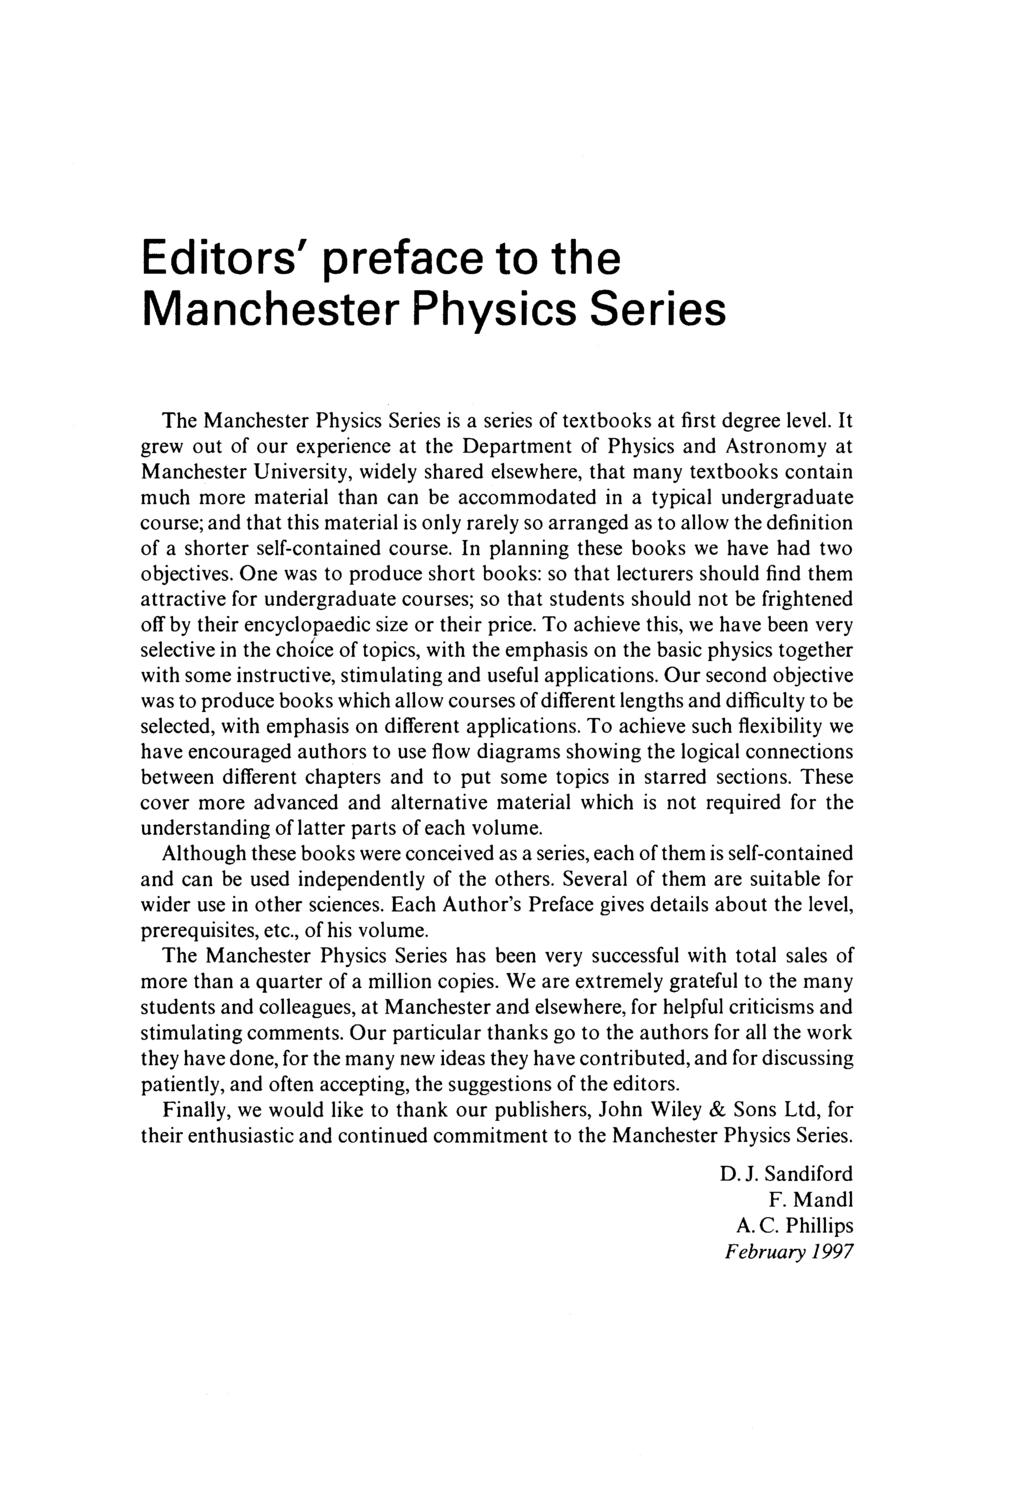 Editors' preface to the Manchester Physics Series The Manchester Physics Series is a series of textbooks at first degree level.